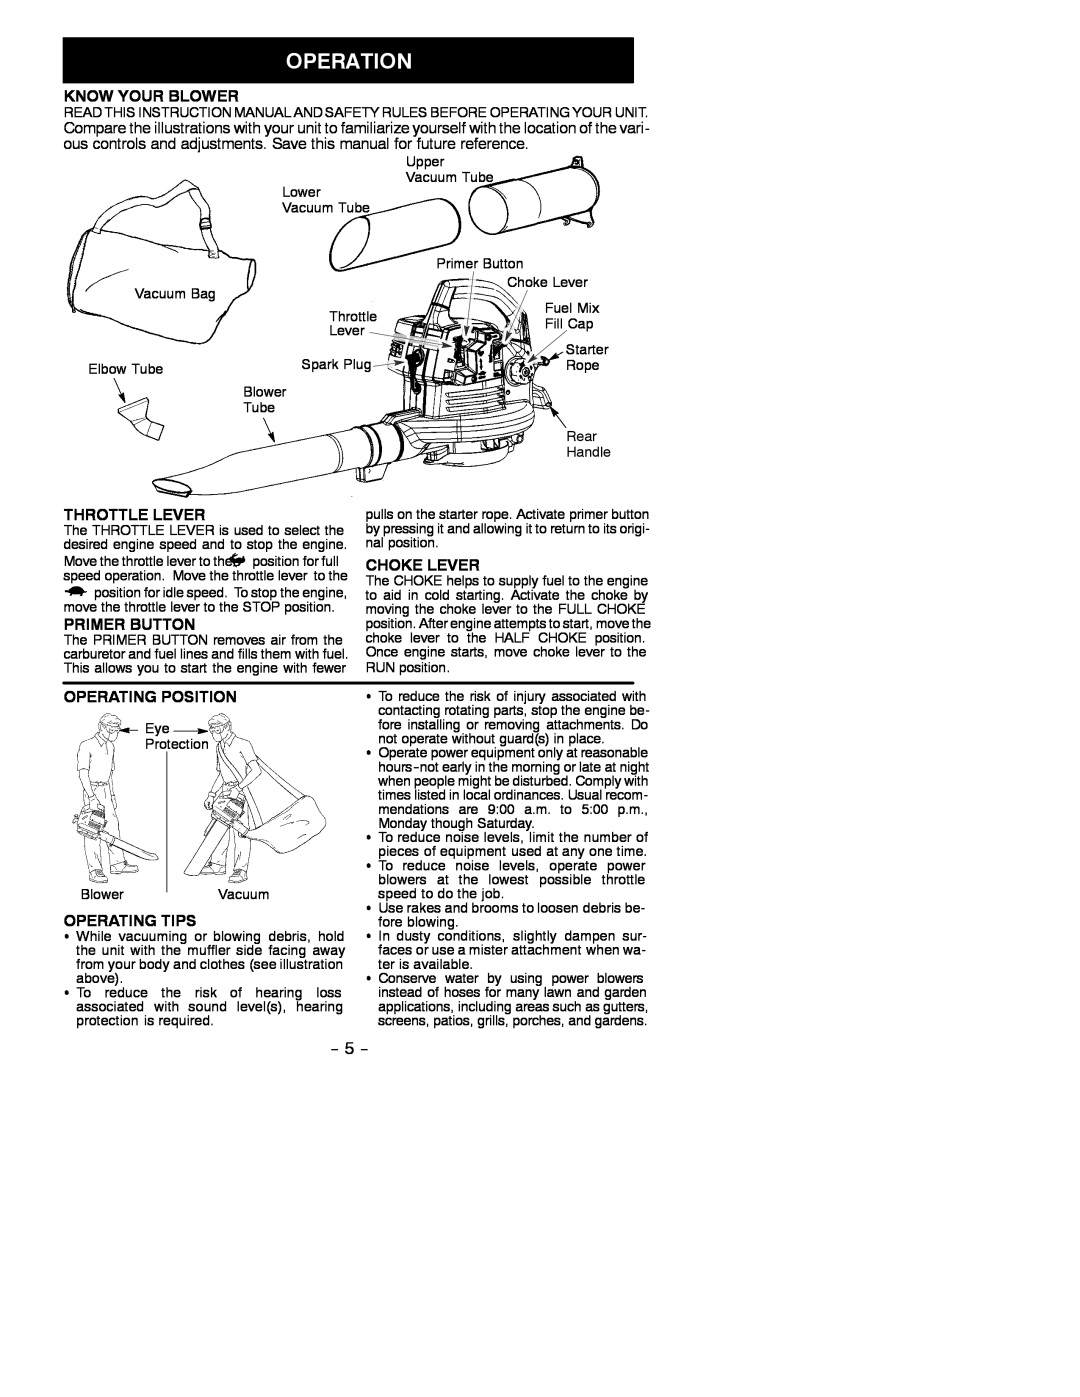 Poulan WT200 Know Your Blower, Throttle Lever, Choke Lever, Primer Button, Operating Position, Operating Tips 